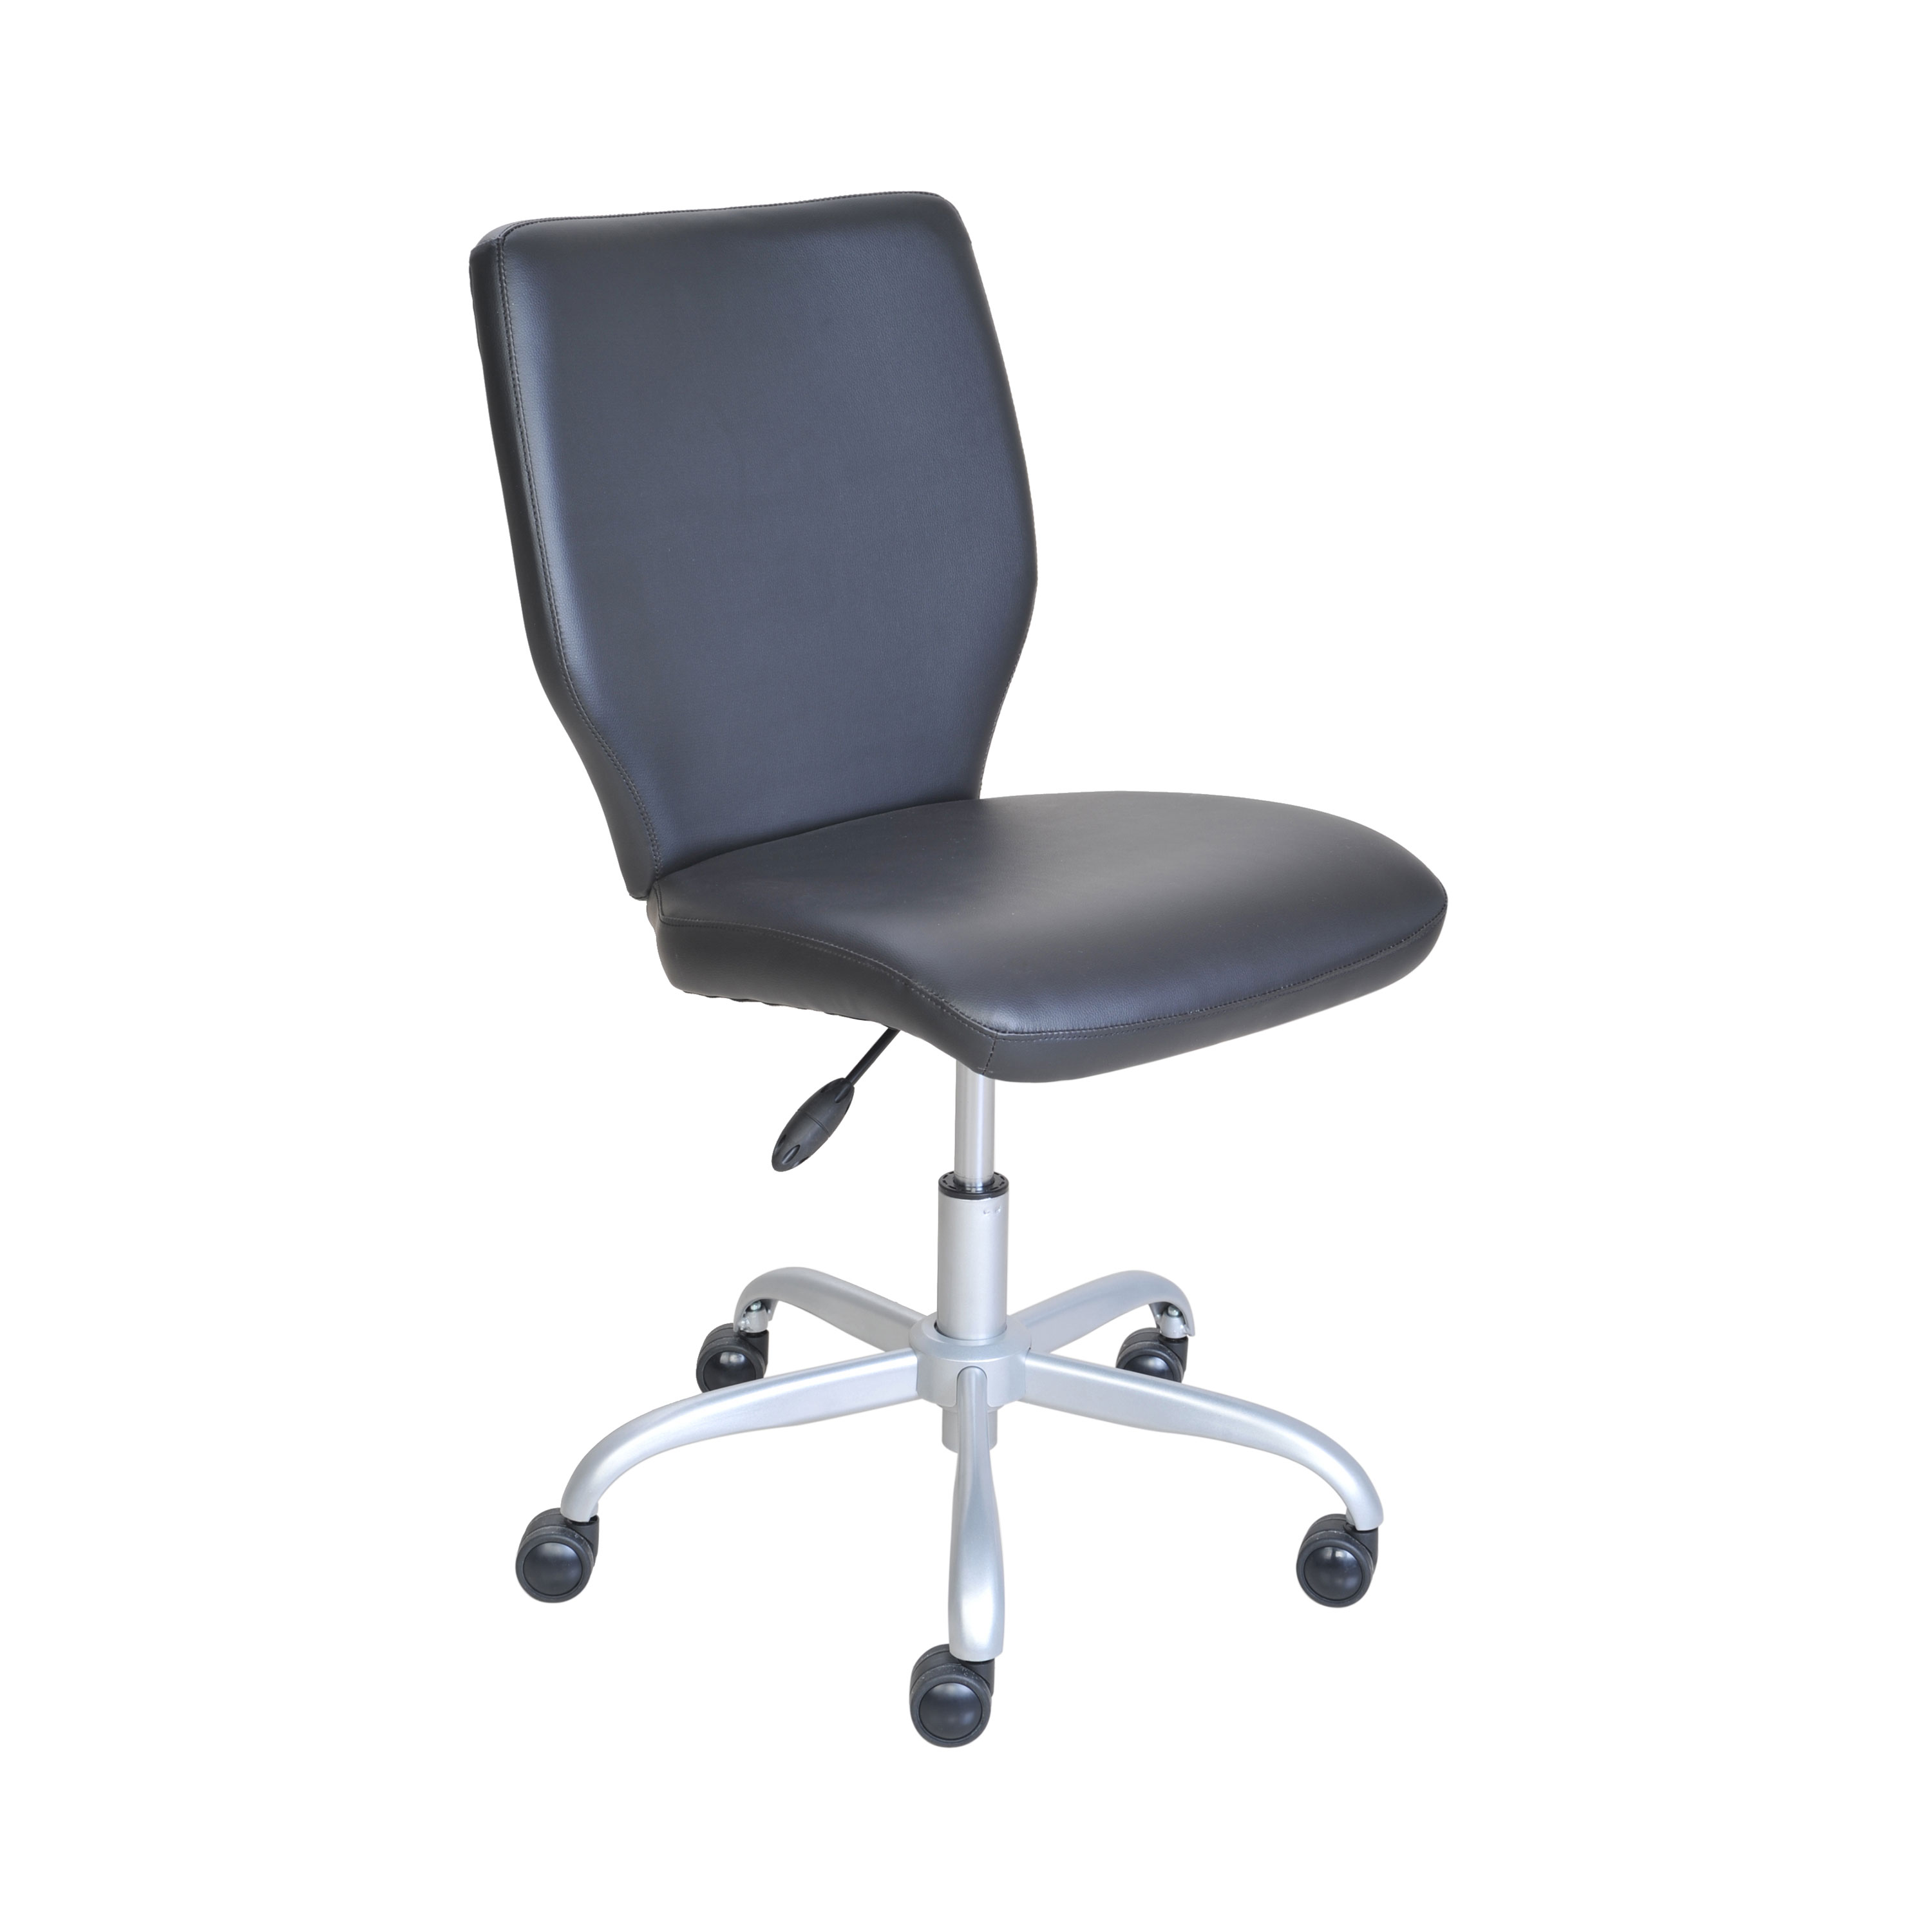 Mainstays Mid-Back Office Chair with Matching Color Casters, Gray Faux Leather - image 1 of 6